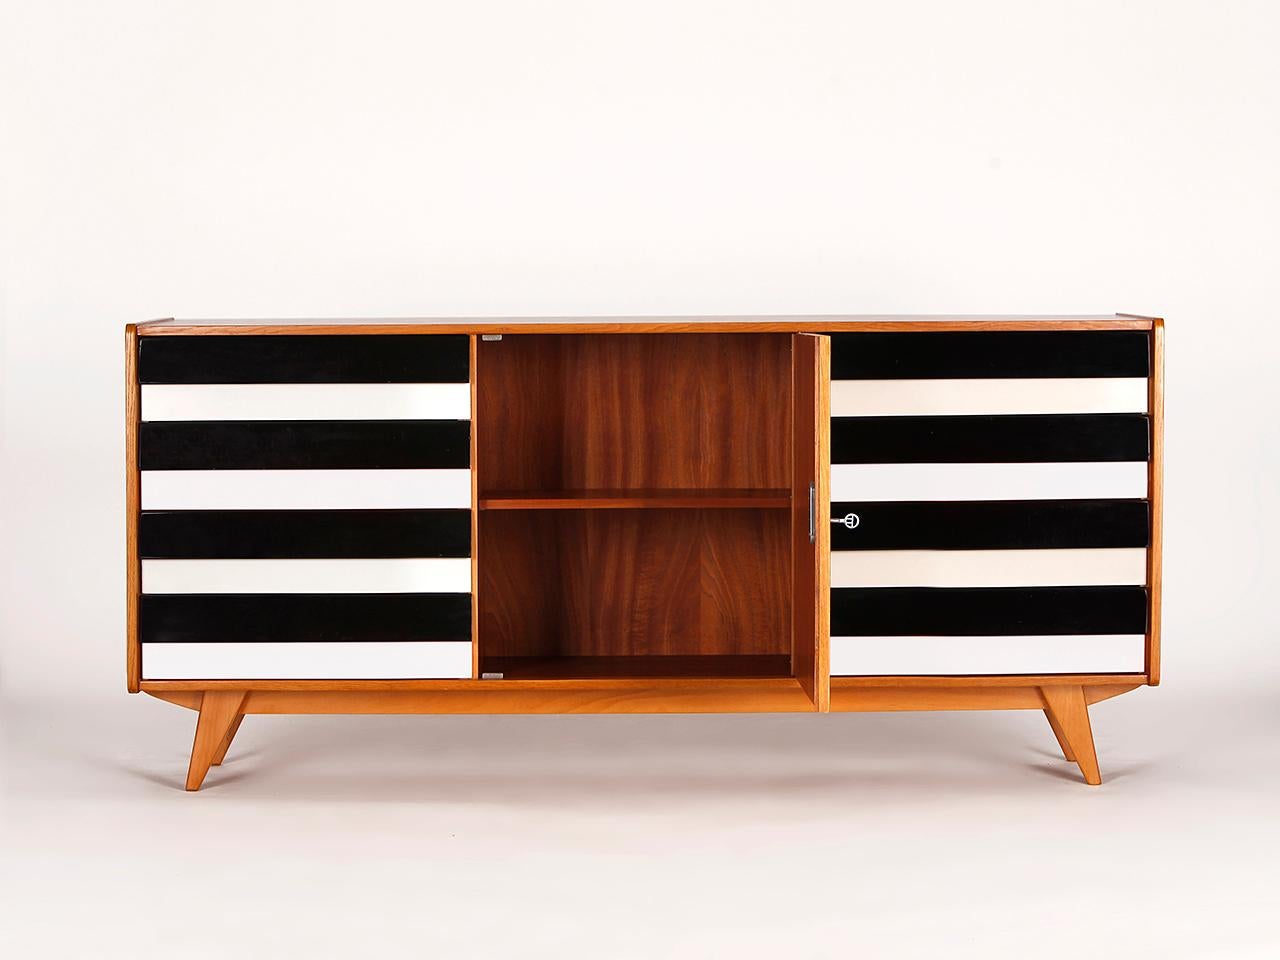 This model U-460 sideboard was designed by Jiri Jiroutek for Interier Praha in former Czechoslovakia. Produced in the 1960s. 
Completely restored. It is an early model with wooden drawers. Excellent condition. Delivery time 3-4 weeks.
